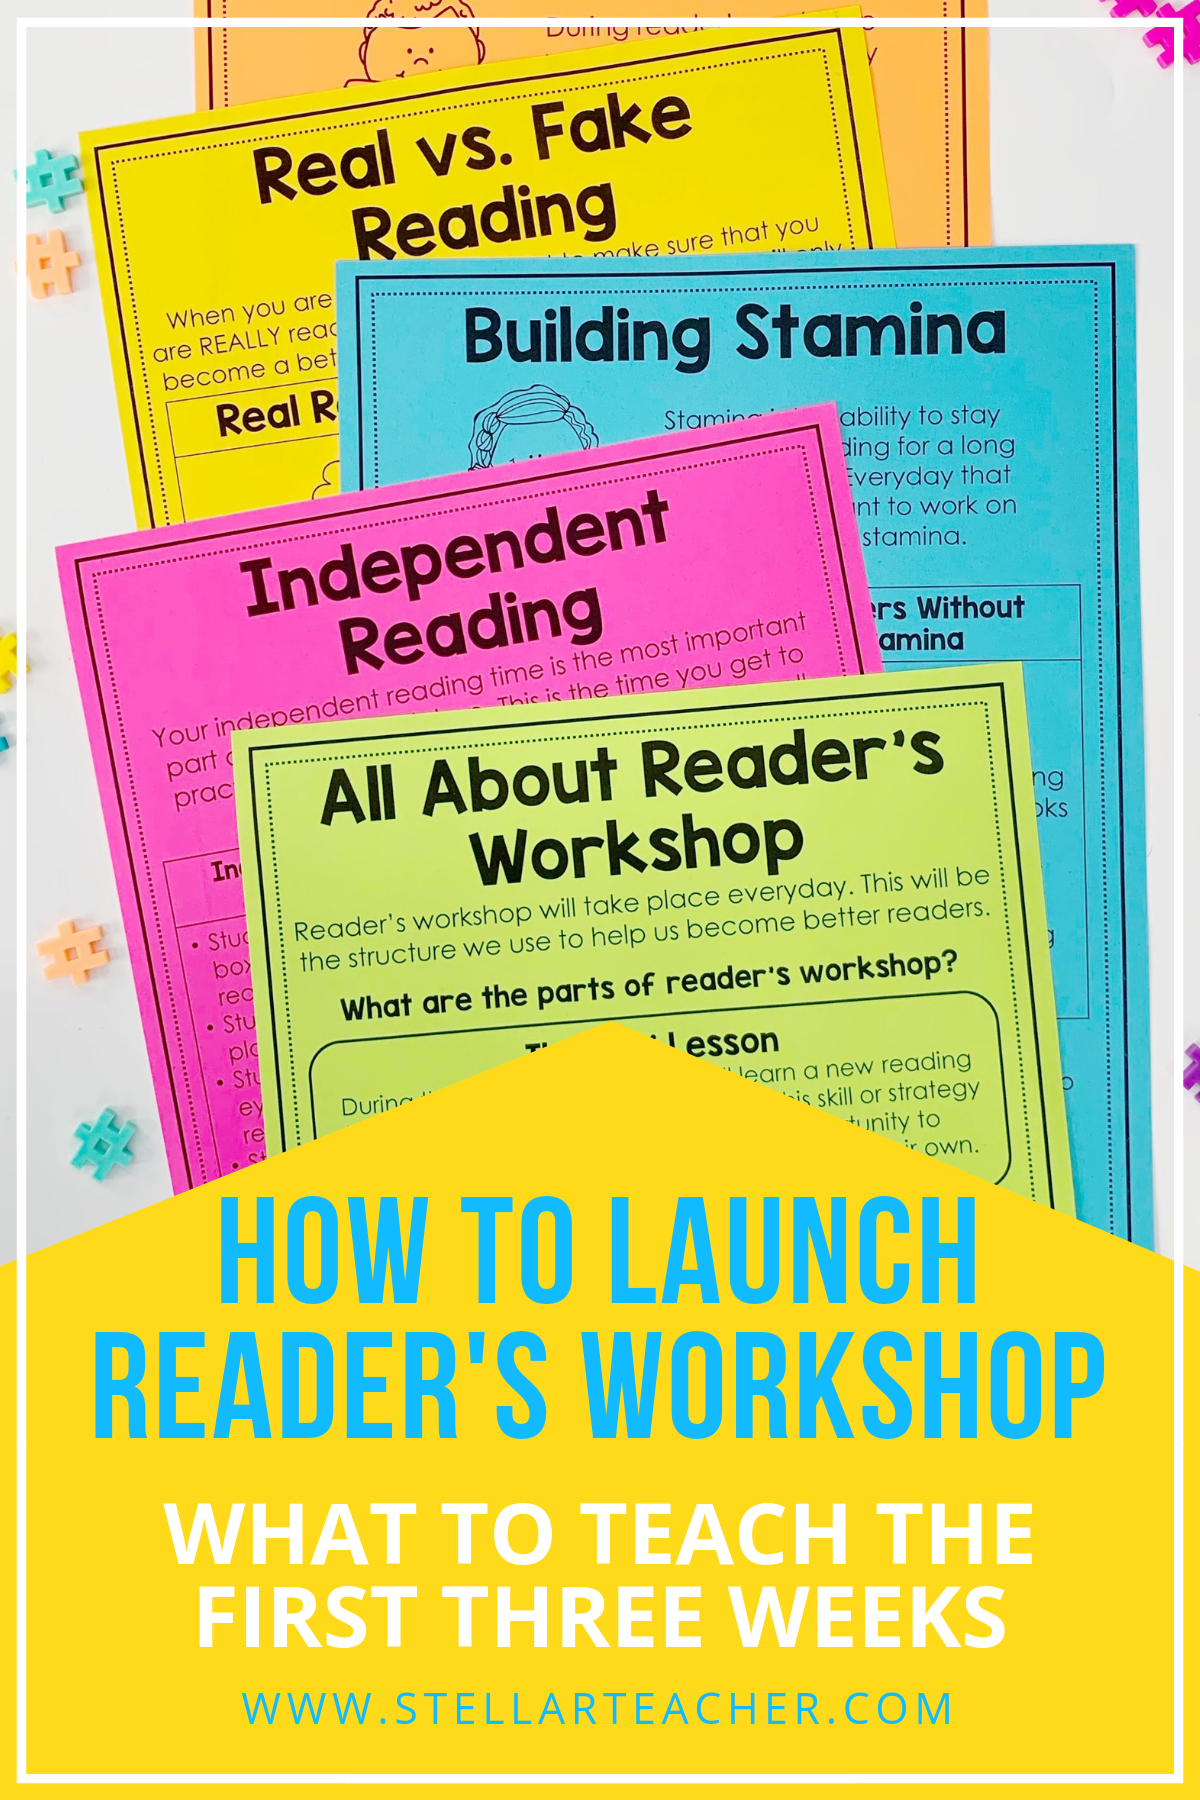 How to Launch Reader's Workshop.png